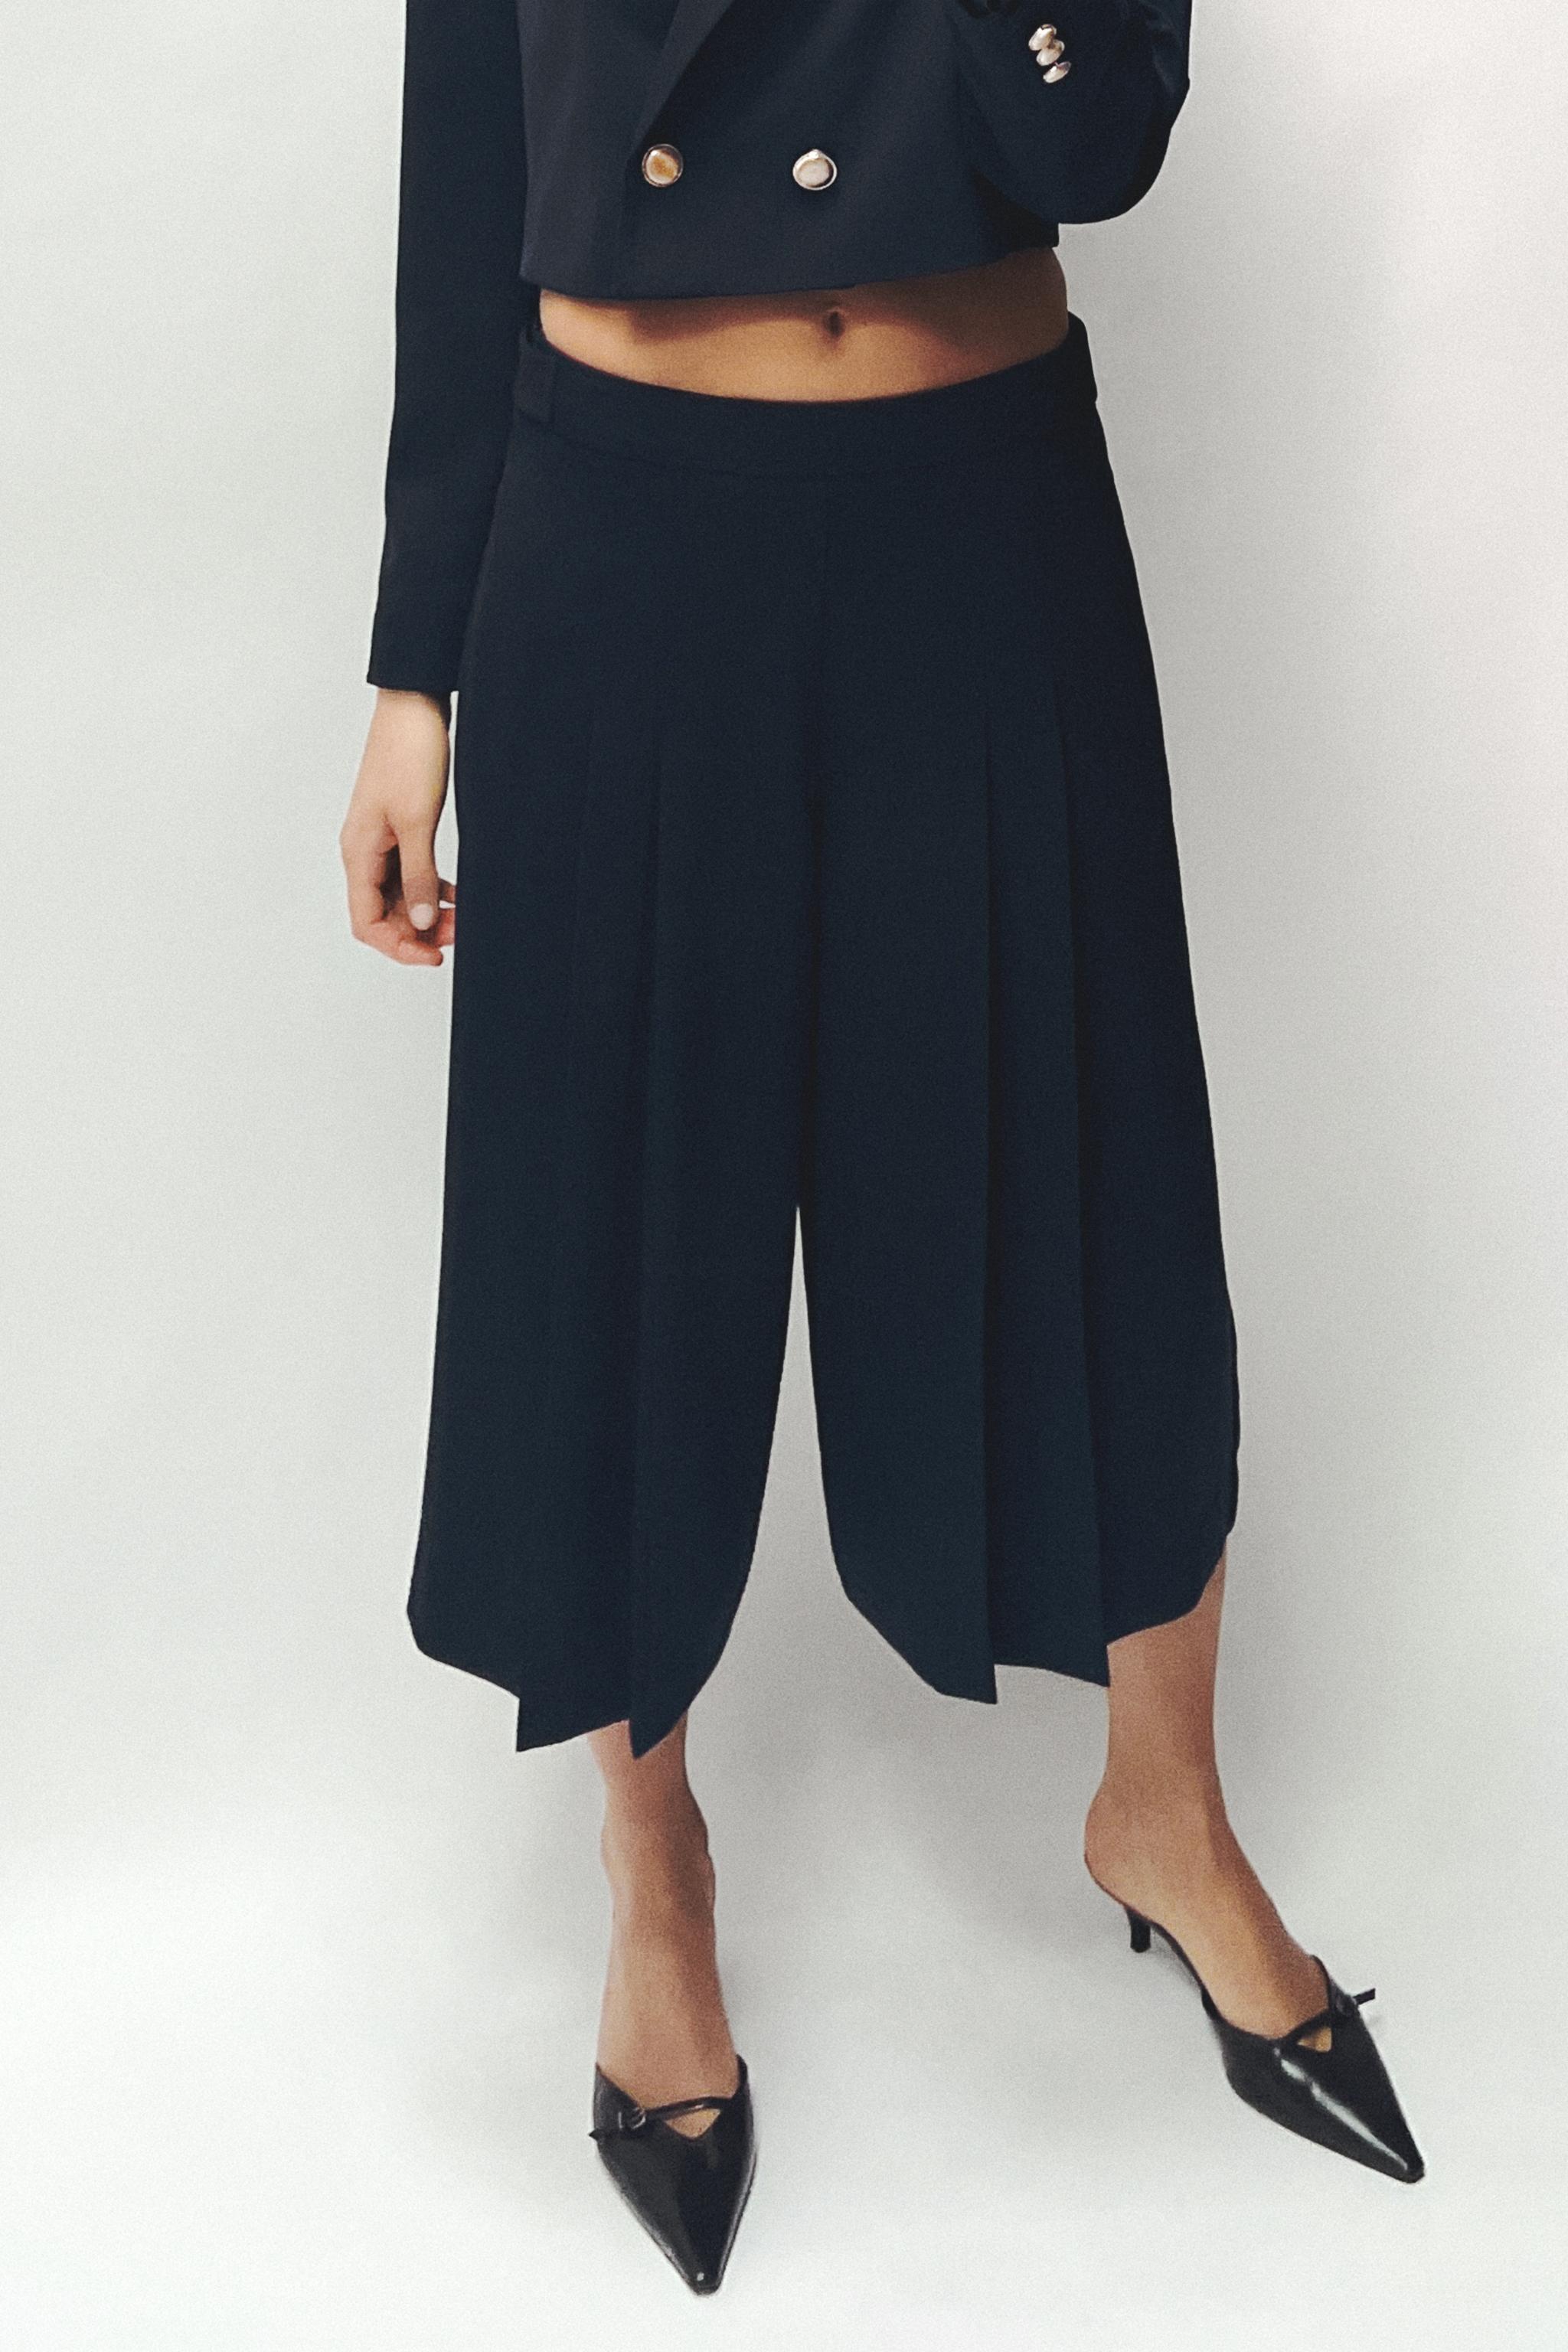 Blue Casual Culotte Pants Online Shopping